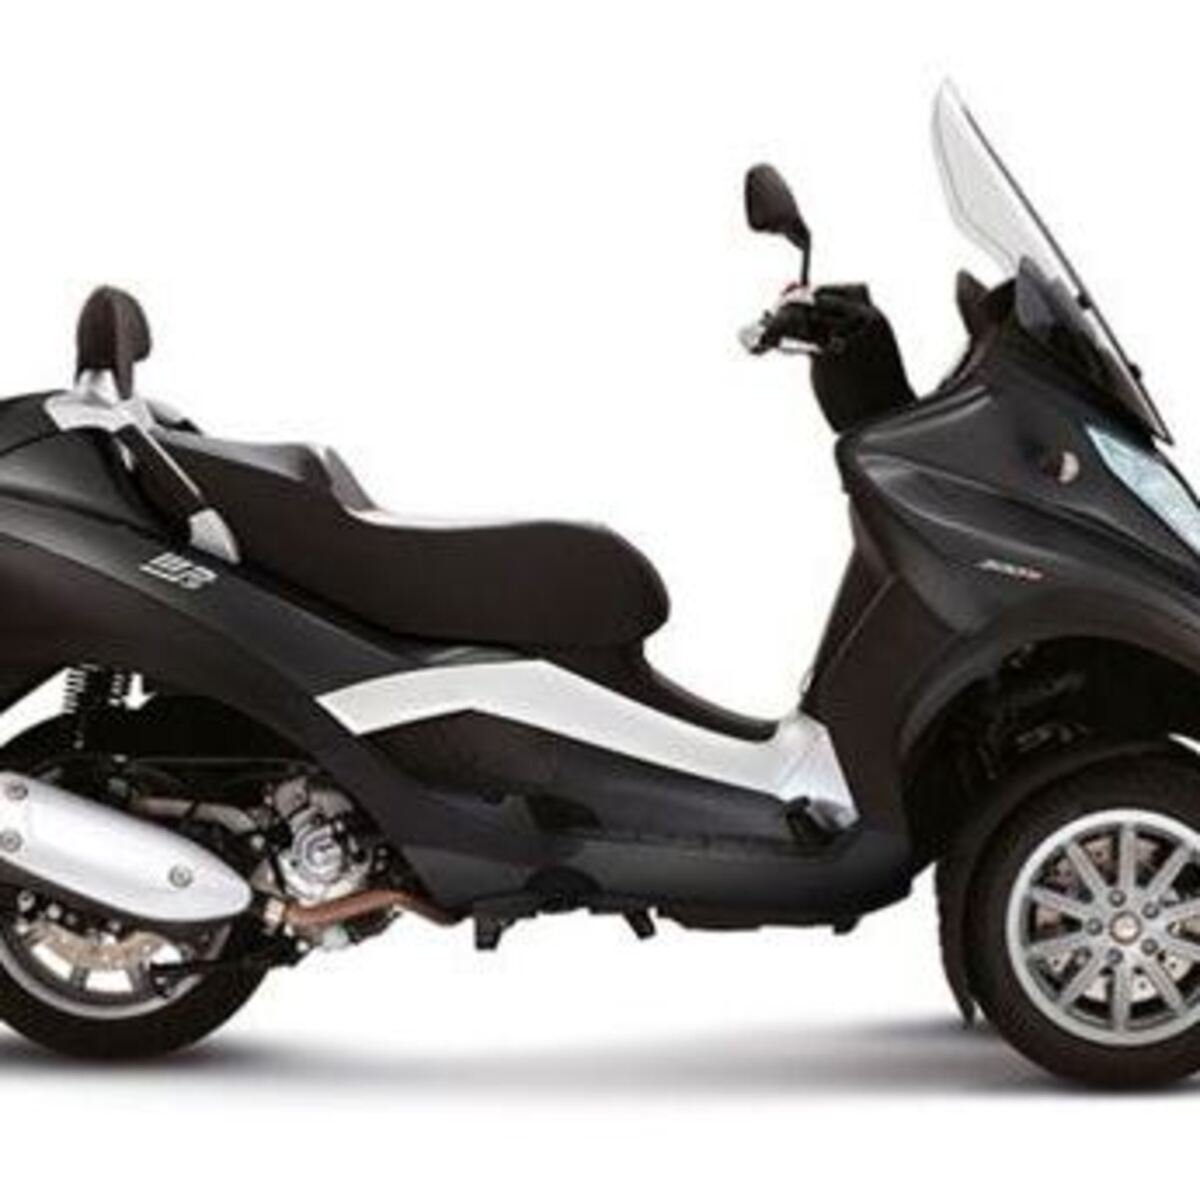 Piaggio MP3 500 ie Business LT ABS (2014 - 16)